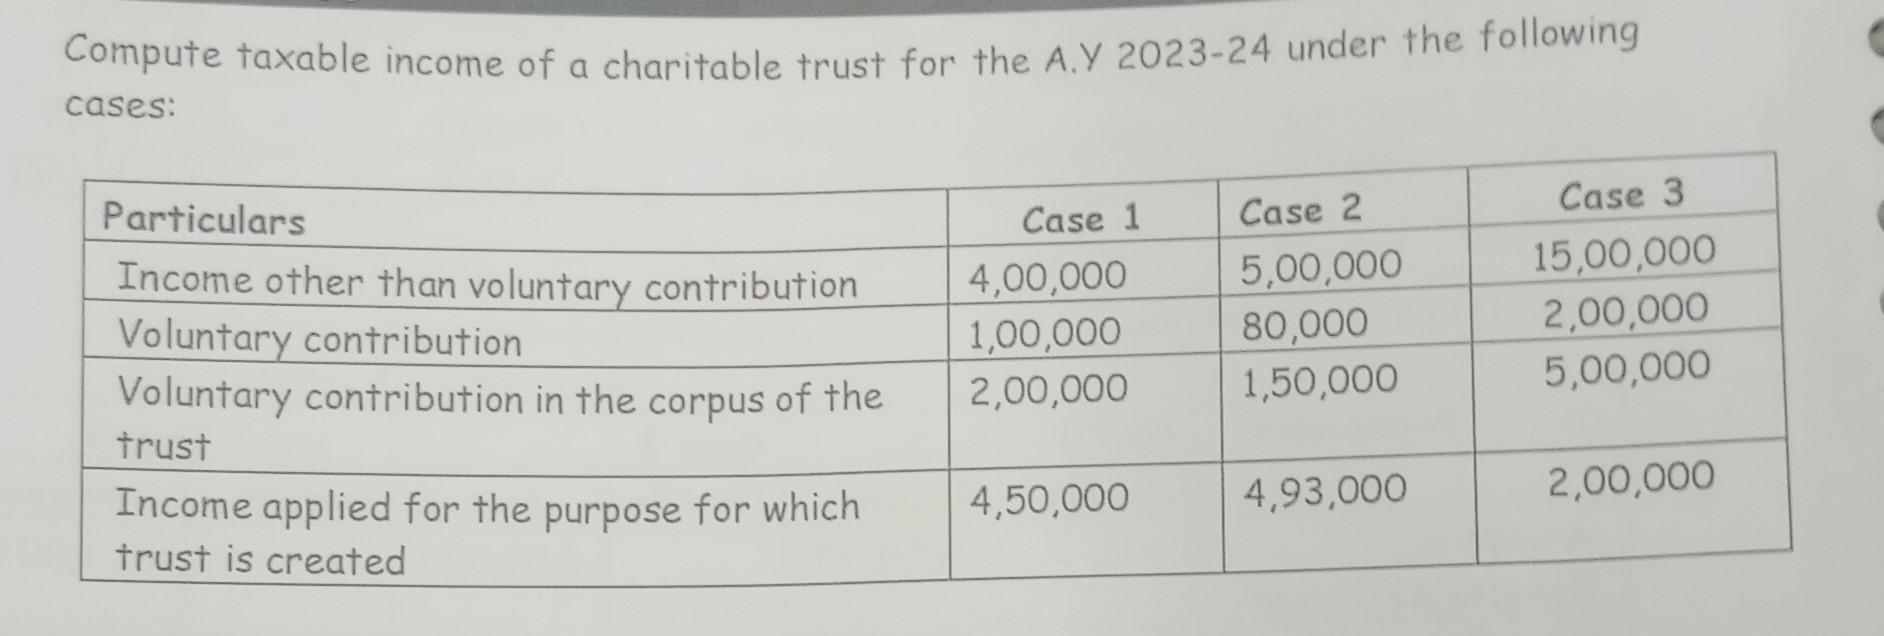 Compute taxable income of a charitable trust for the A.Y 2023-24 under the following cases: Particulars